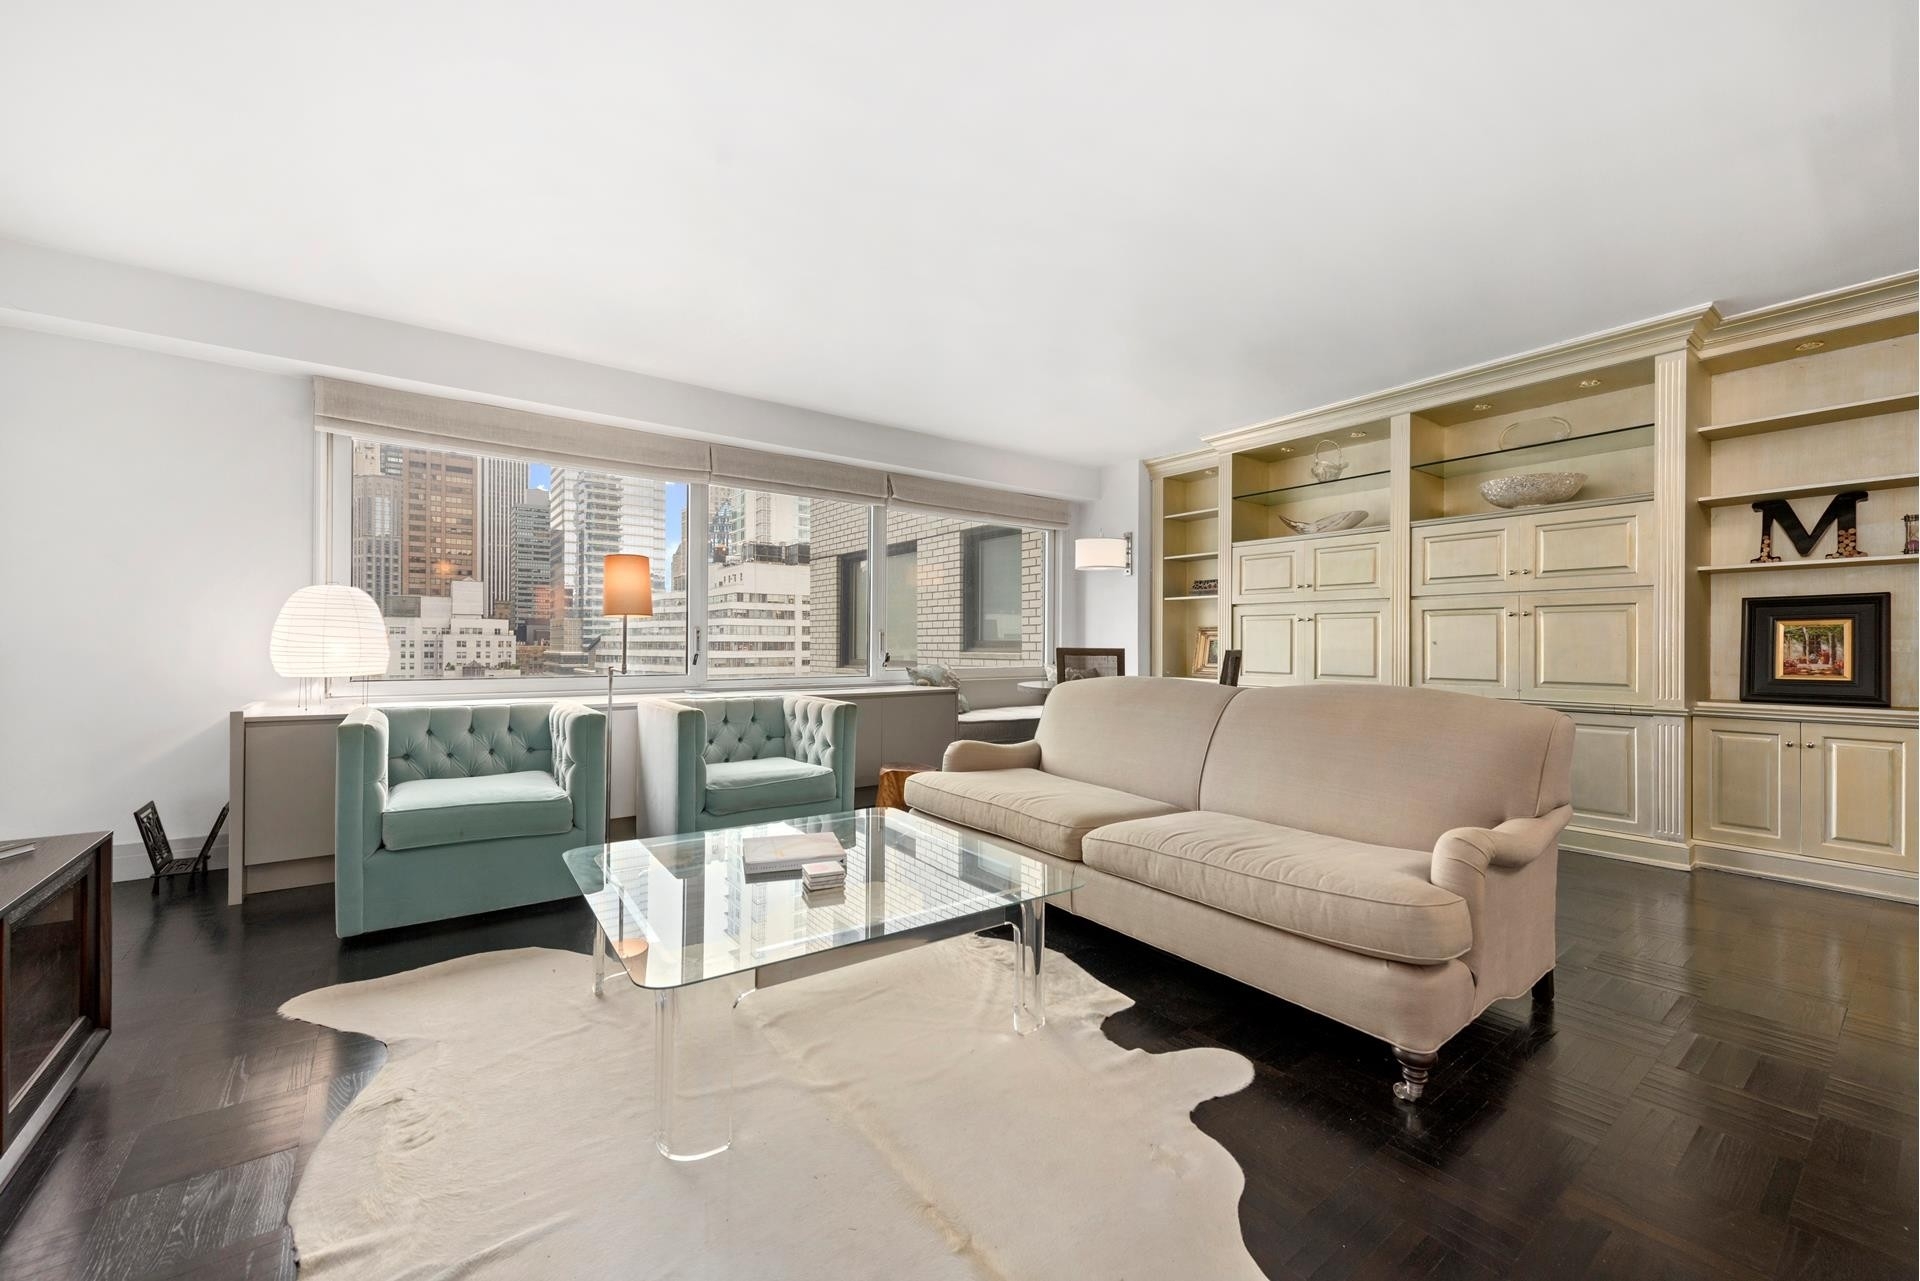 Co-op Properties for Sale at The Excelsior, 303 E 57TH ST, 17F Midtown East, New York, New York 10022